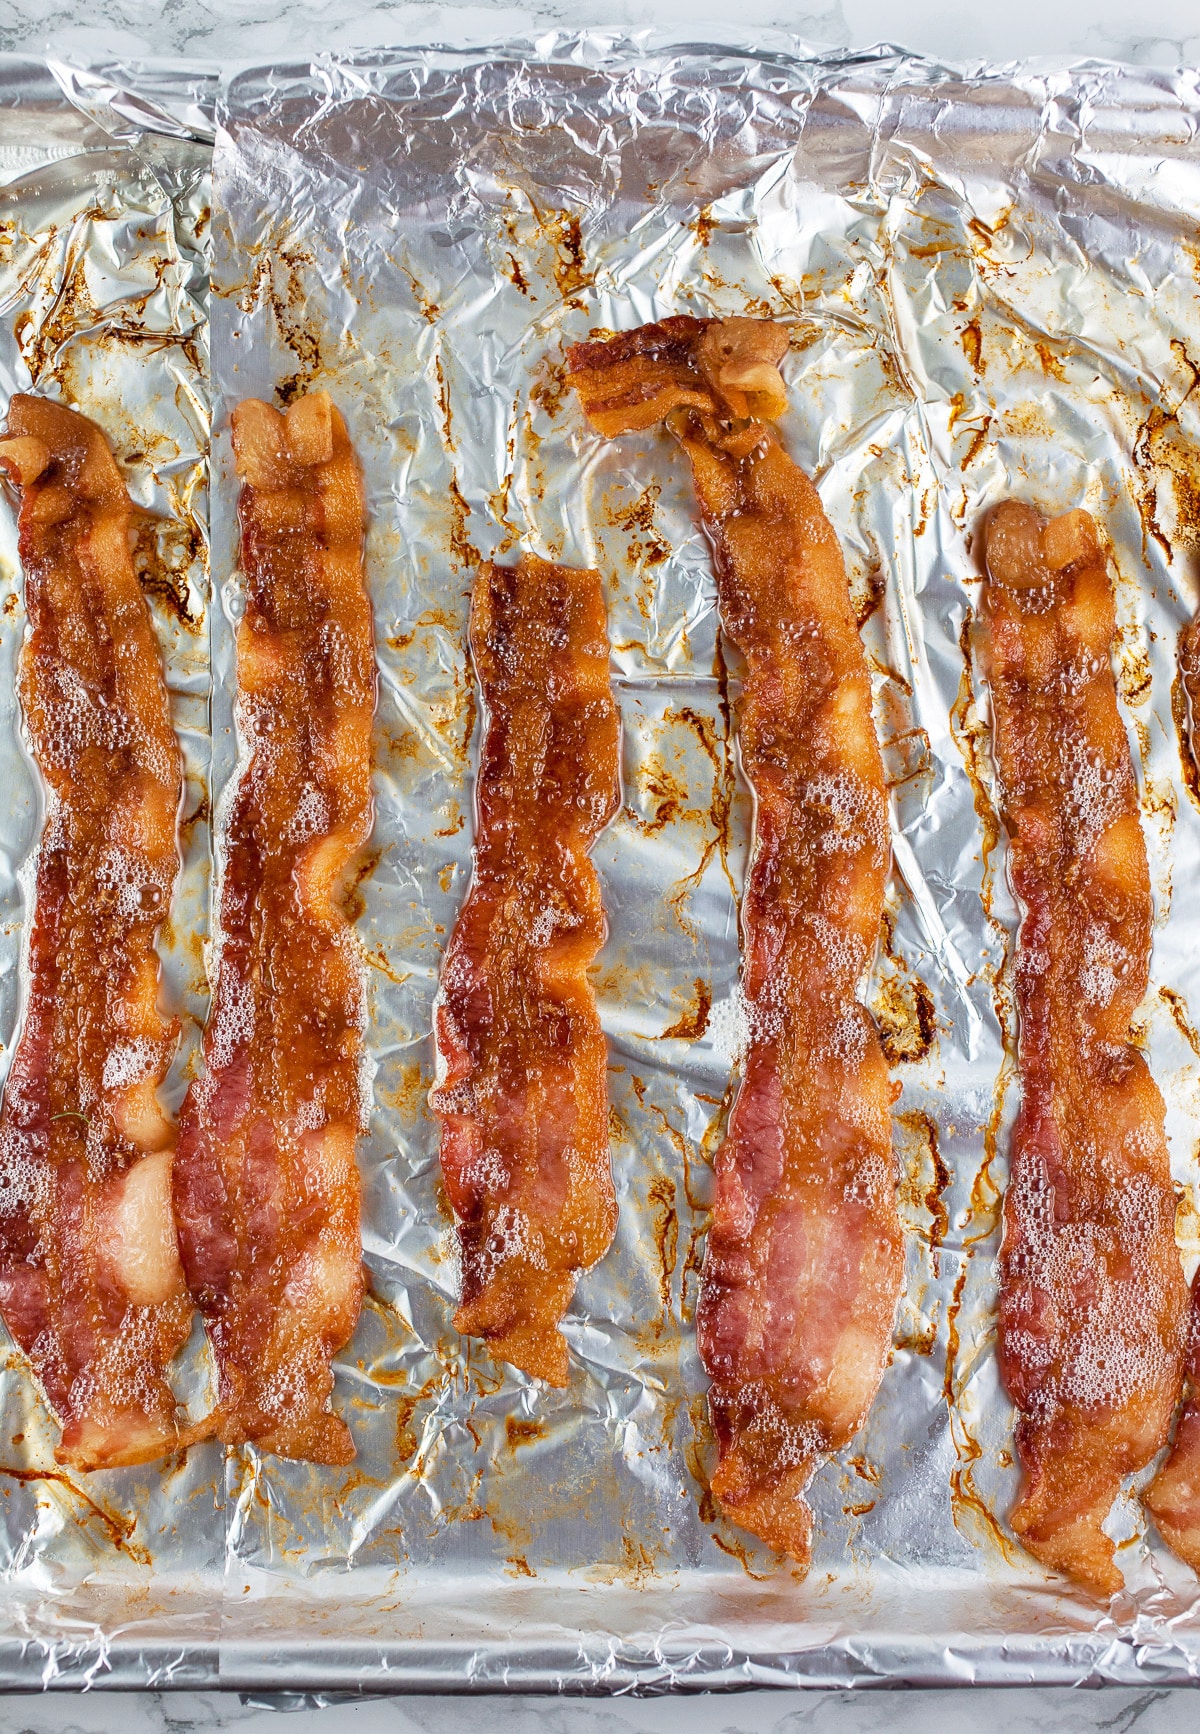 Cooked bacon on aluminum foil lined baking sheet.